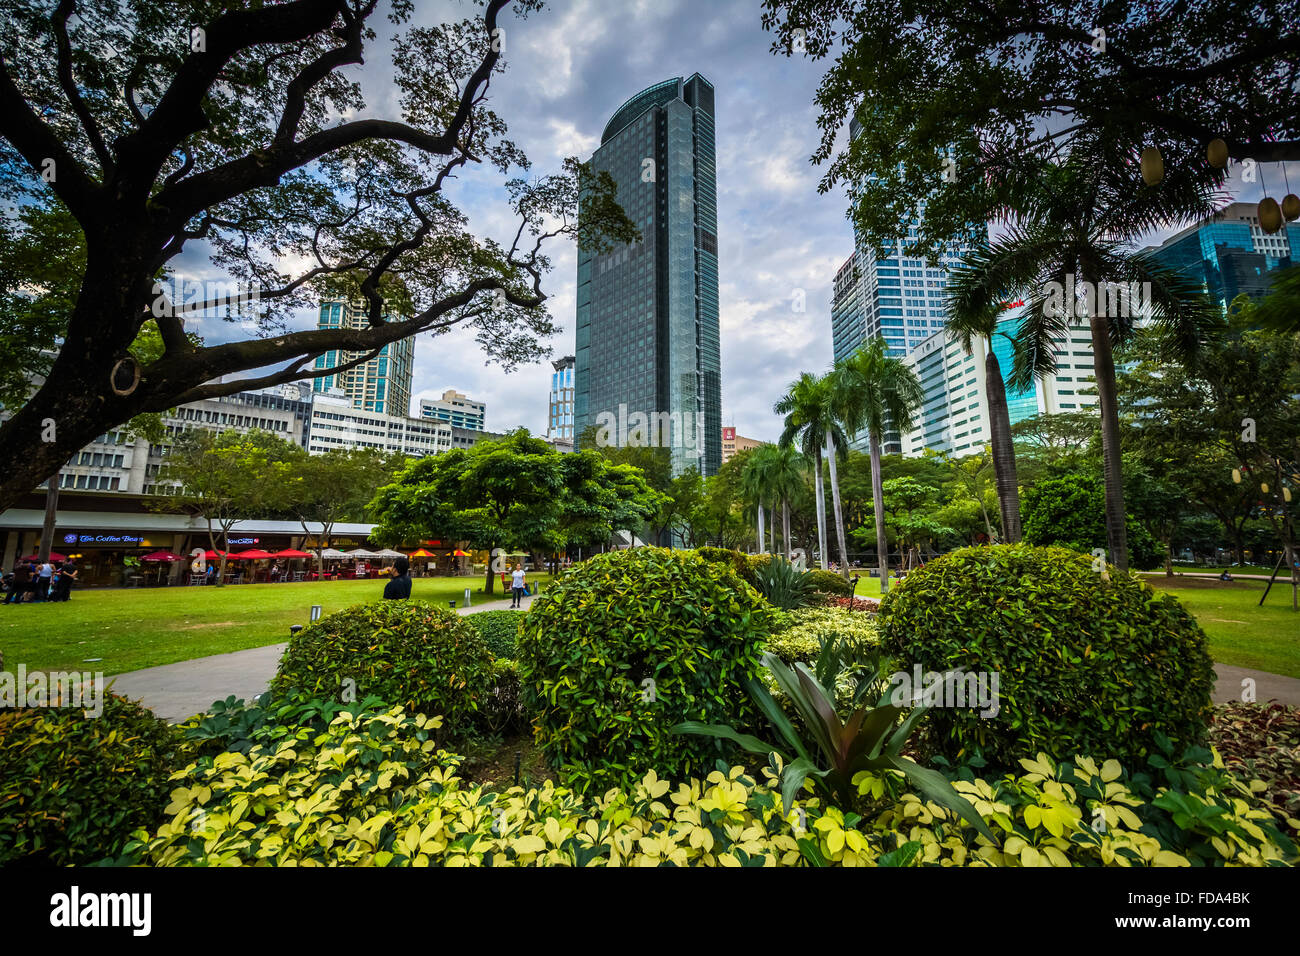 Garden And Skyscrapers At Greenbelt Park, In Ayala, Makati, Metro Manila,  The Philippines. Stock Photo, Picture and Royalty Free Image. Image  54904214.